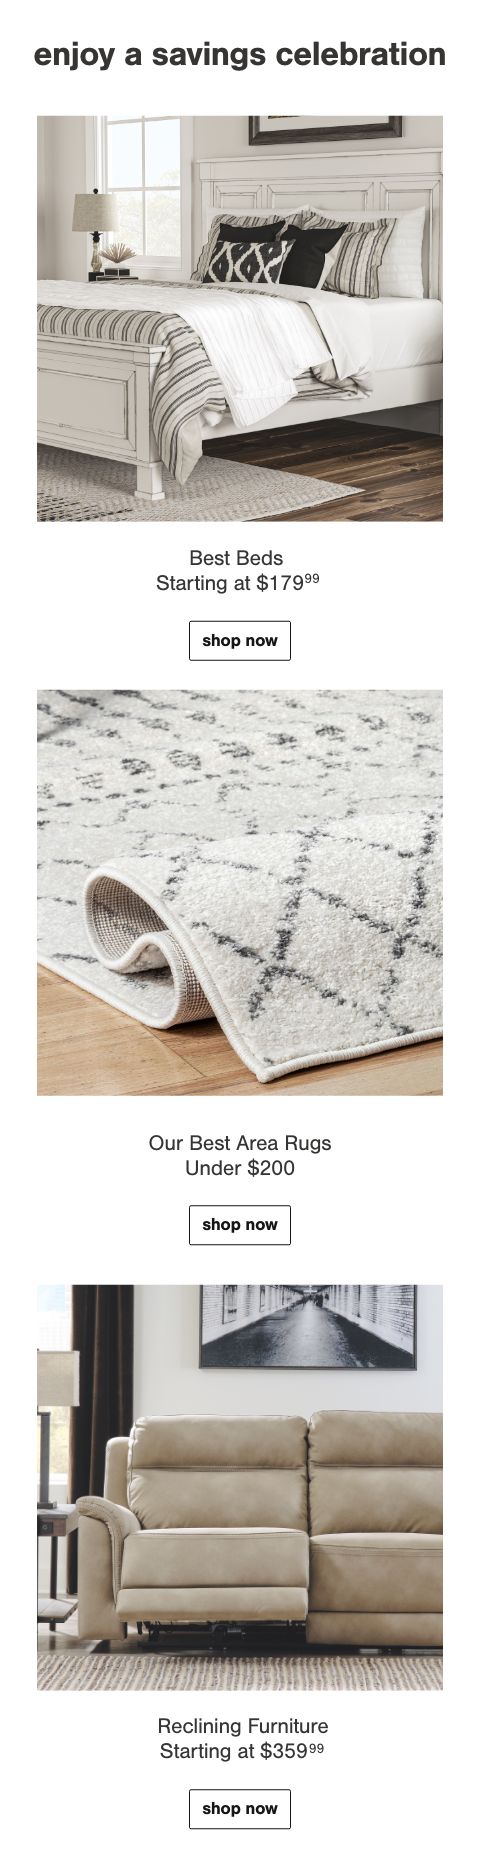 Summer Refresh: Best Beds Starting at 179.99, Our Best Area Rugs Under $200, Reclining Furniture Starting At $359.99